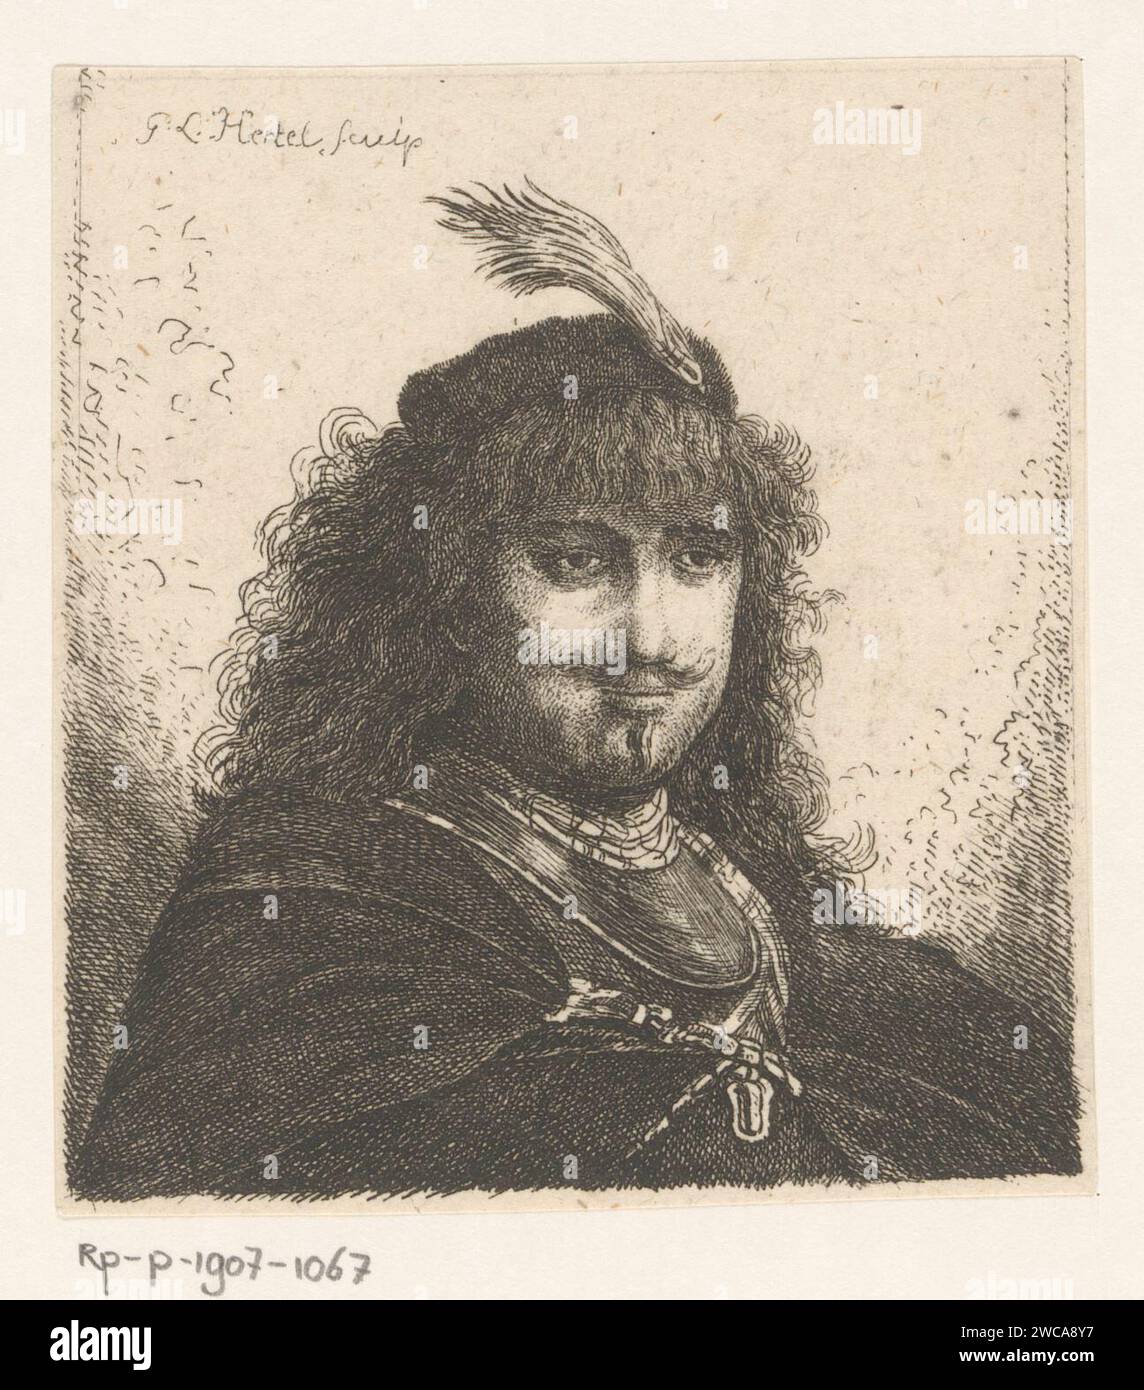 Man with feathered beret, Georg Leopold Hertel, after Rembrandt van Rijn, 1750 - 1778 print   paper etching Stock Photo